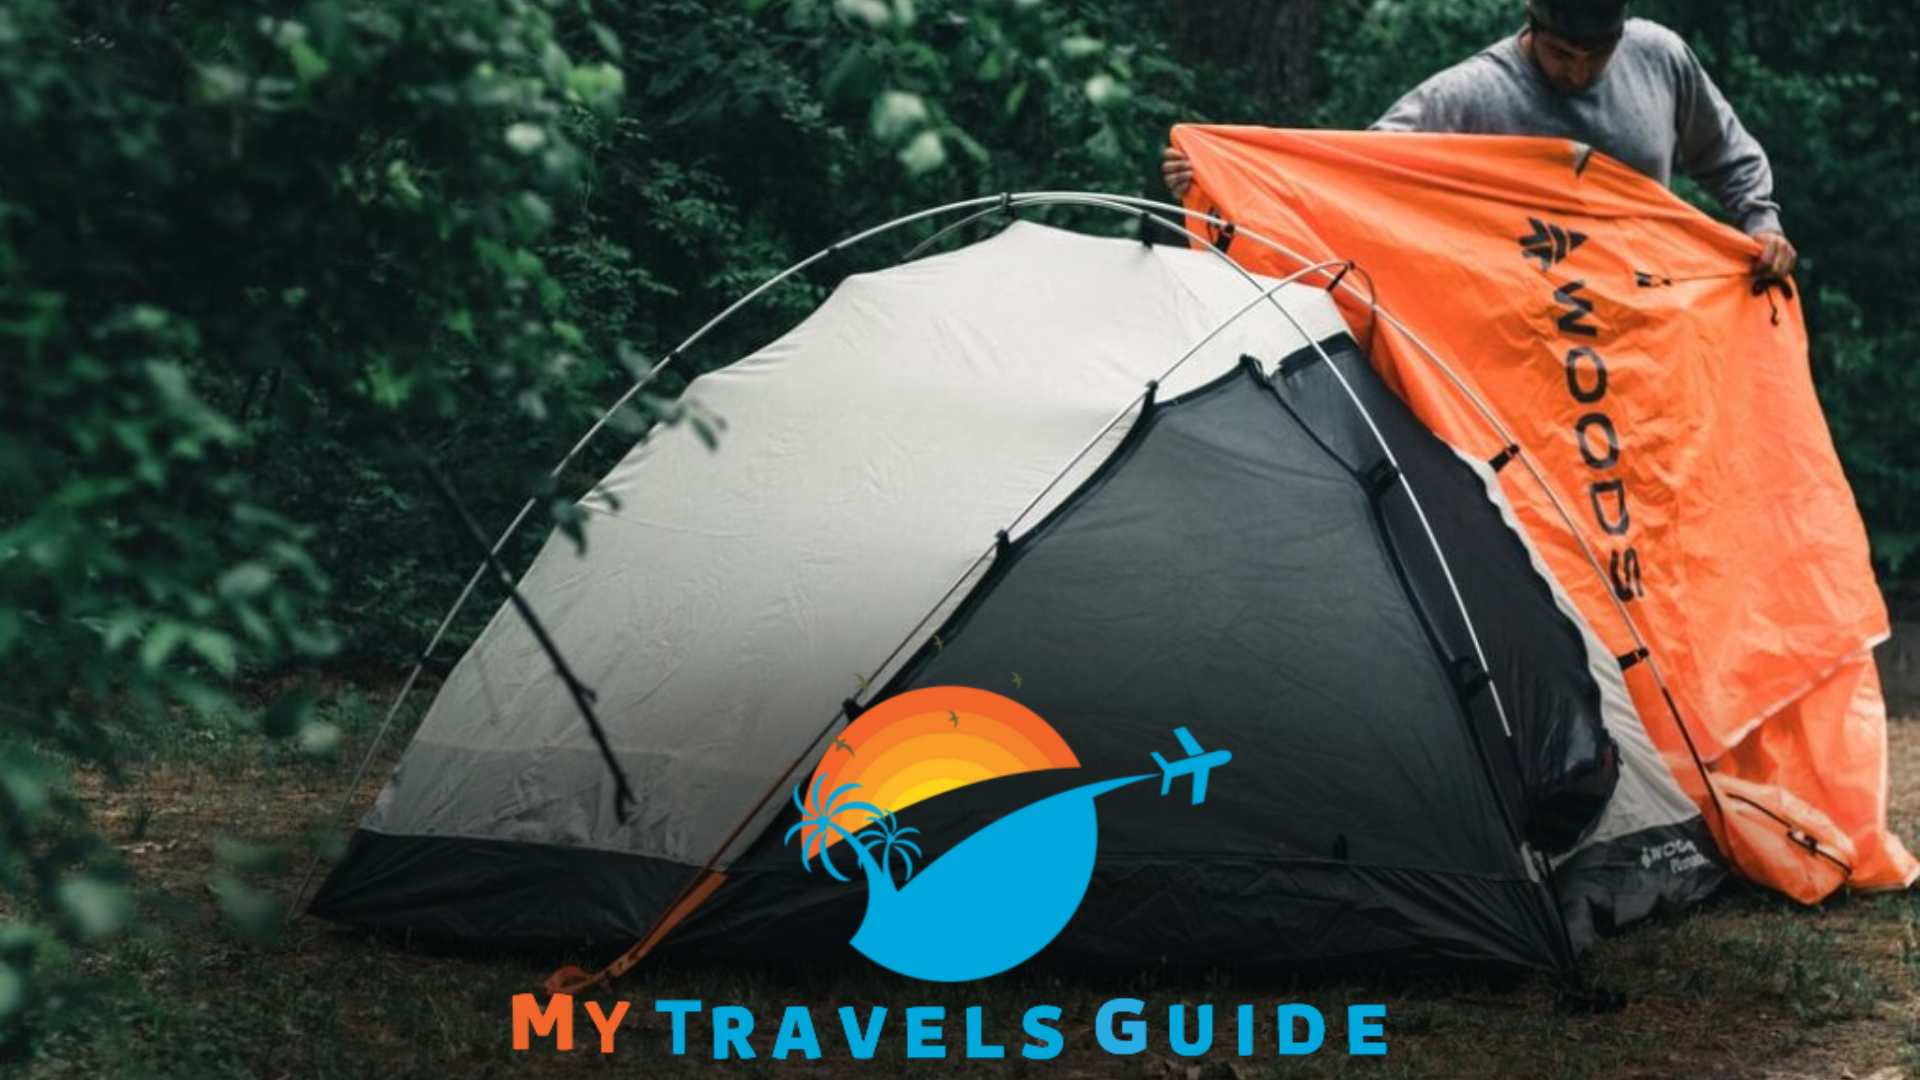 How to Keep Your Tent Dry Inside?